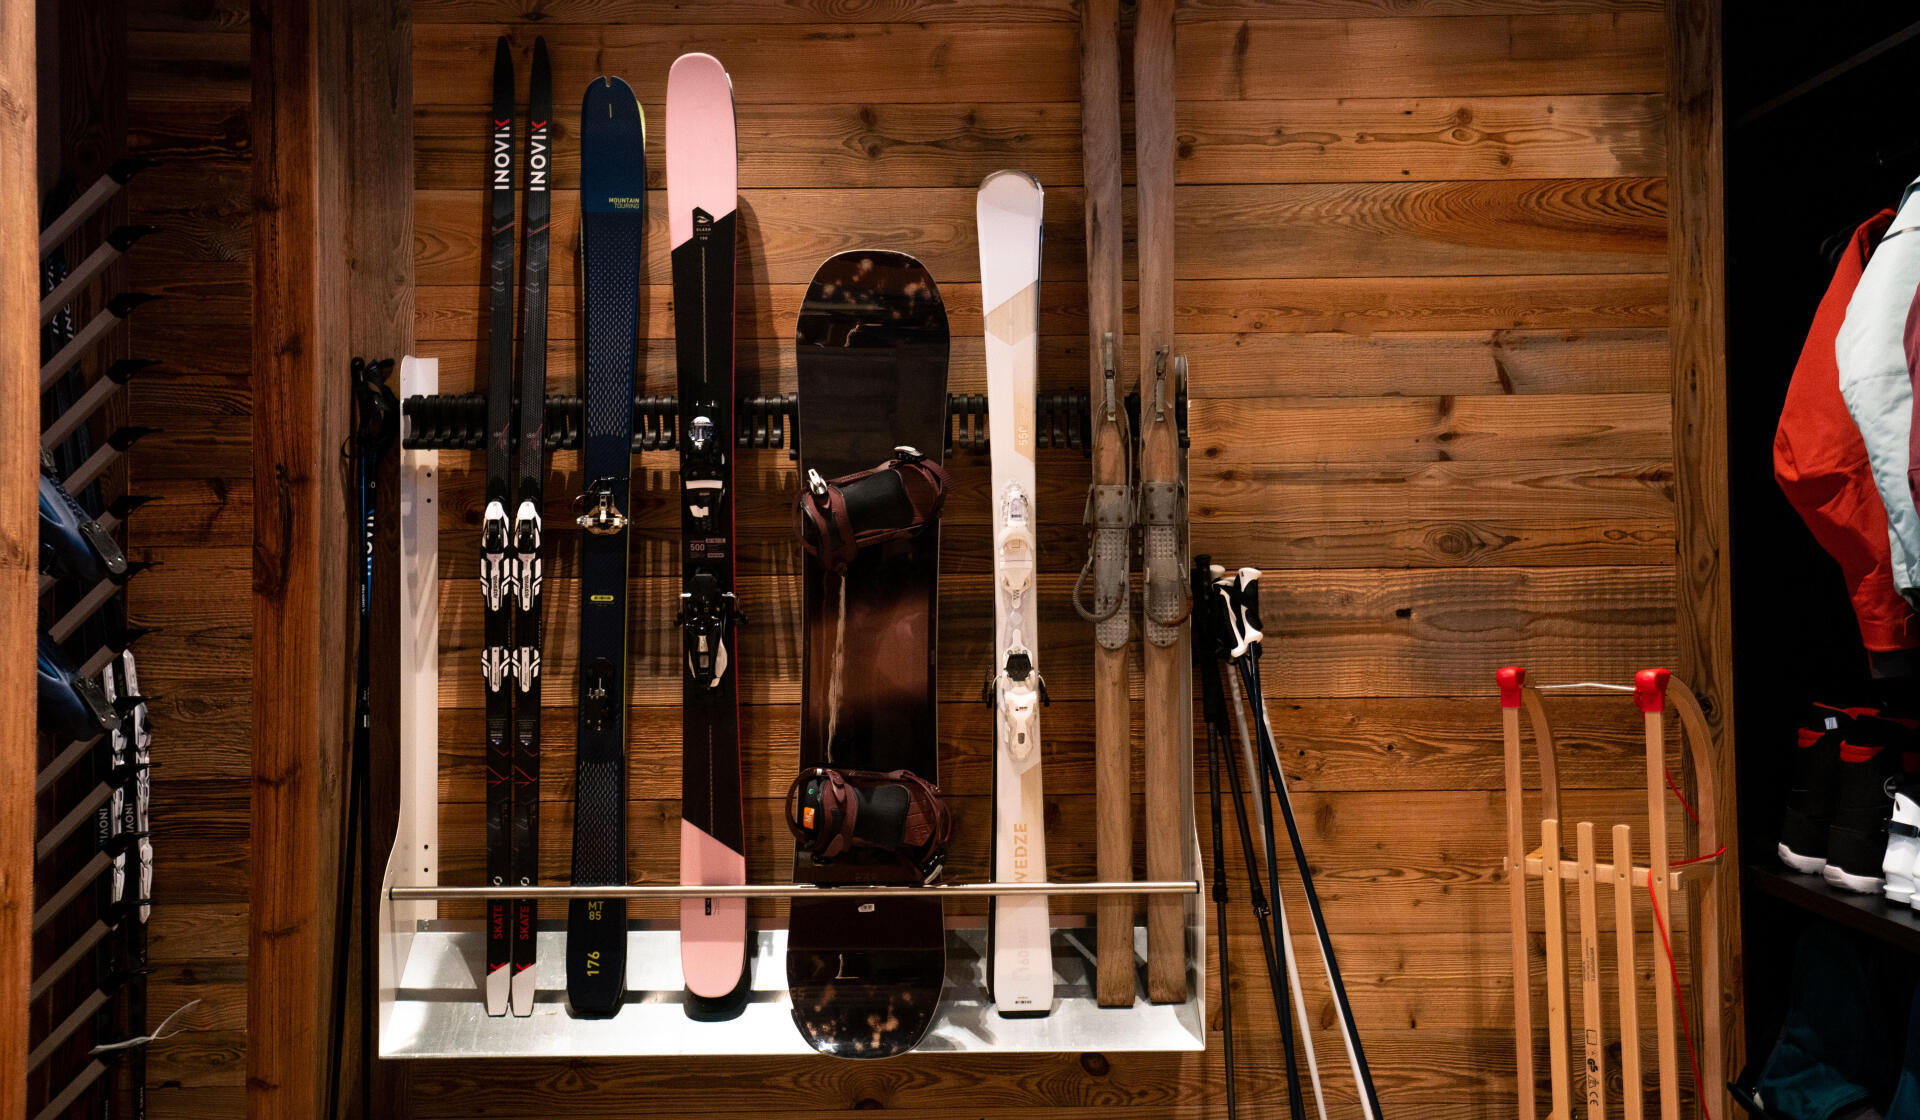 How to maintain downhill skiing without waxing